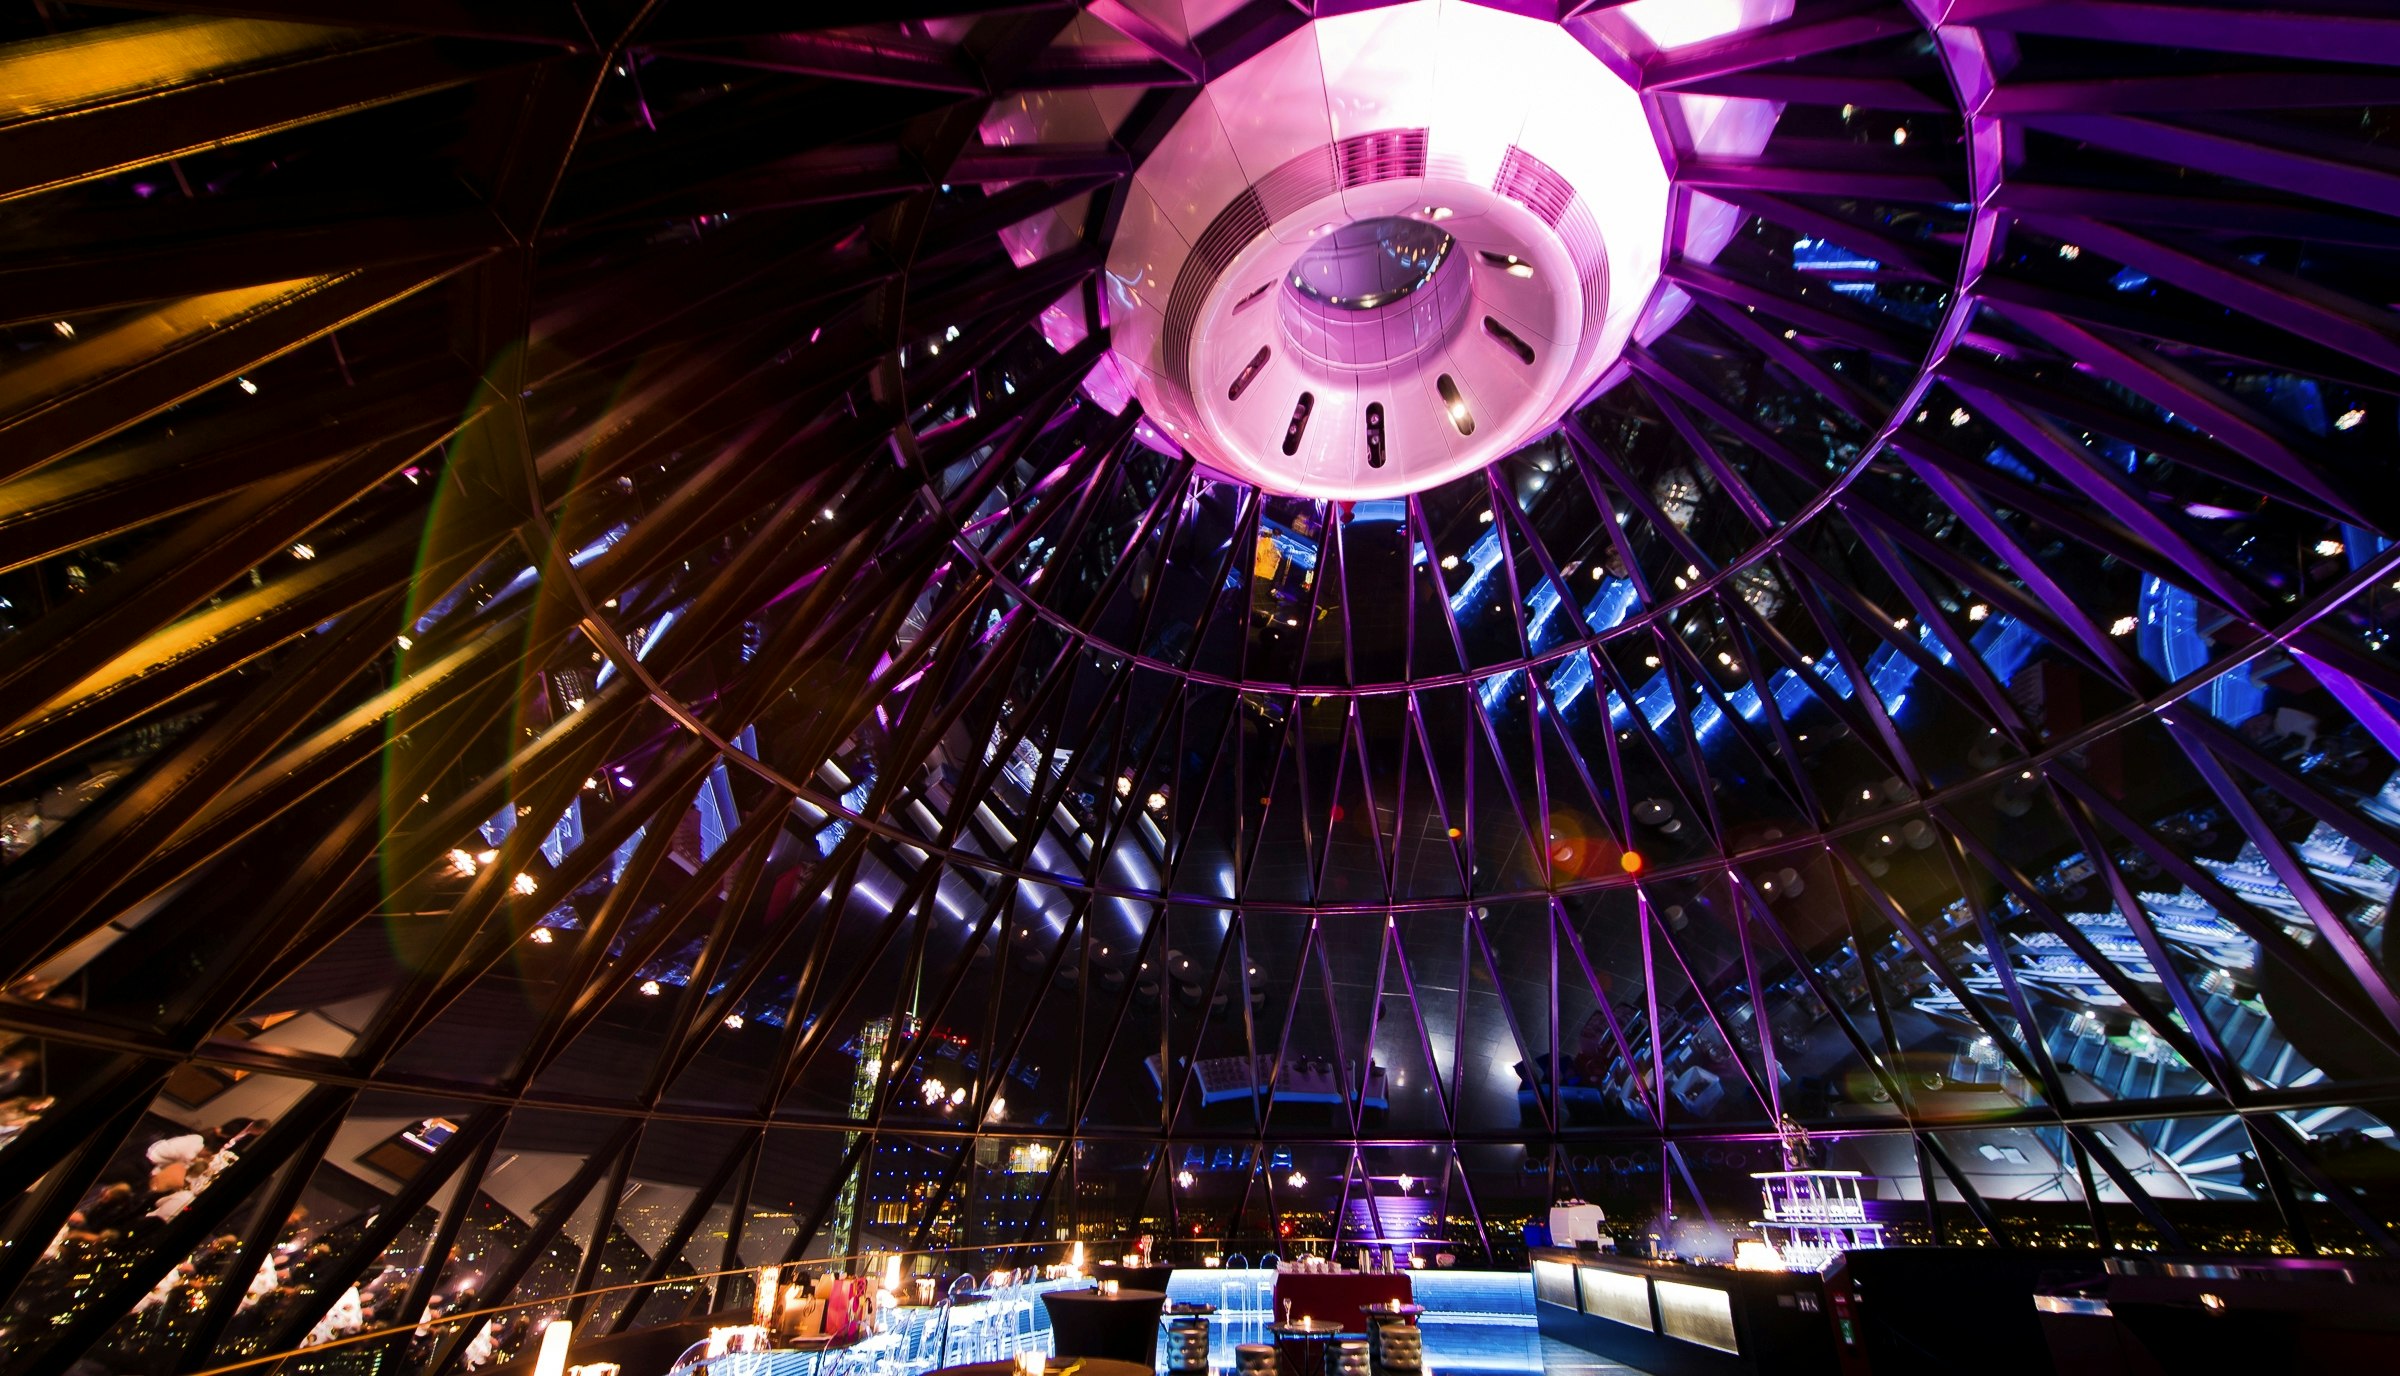 Searcys at the Gherkin - Exclusive hire of Helix and Iris image 2